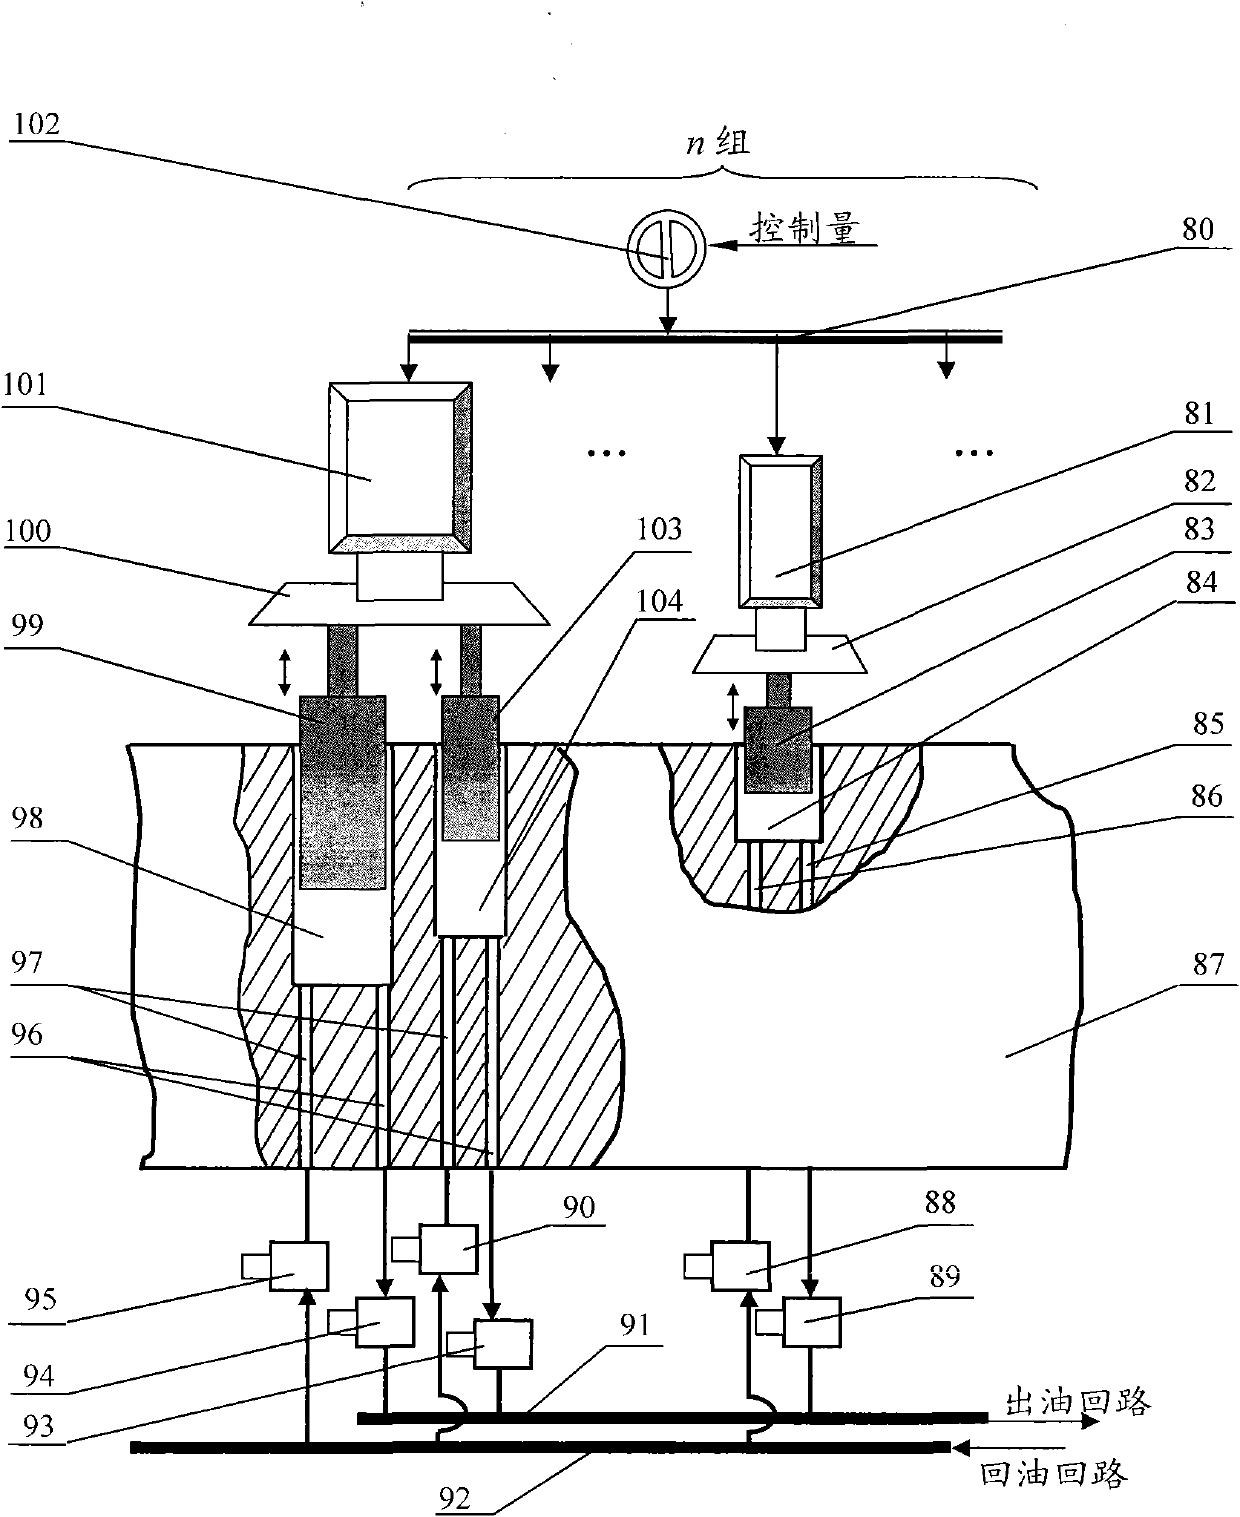 Electrical control variable plunger pump and pump control hydraulic system thereof